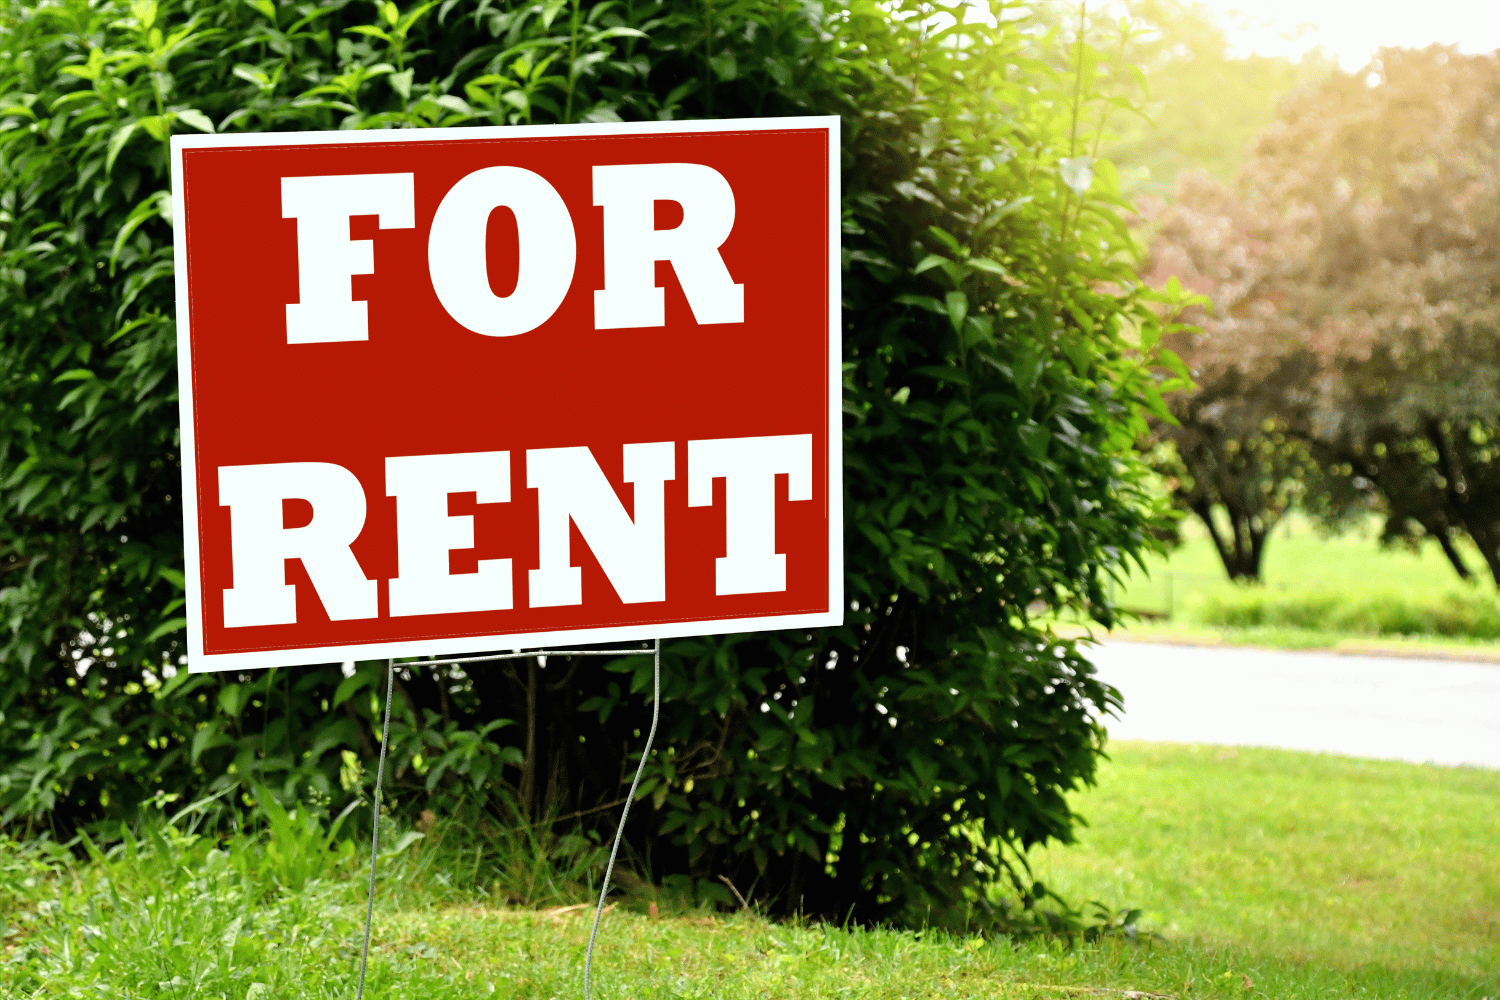 For rent. Rent out